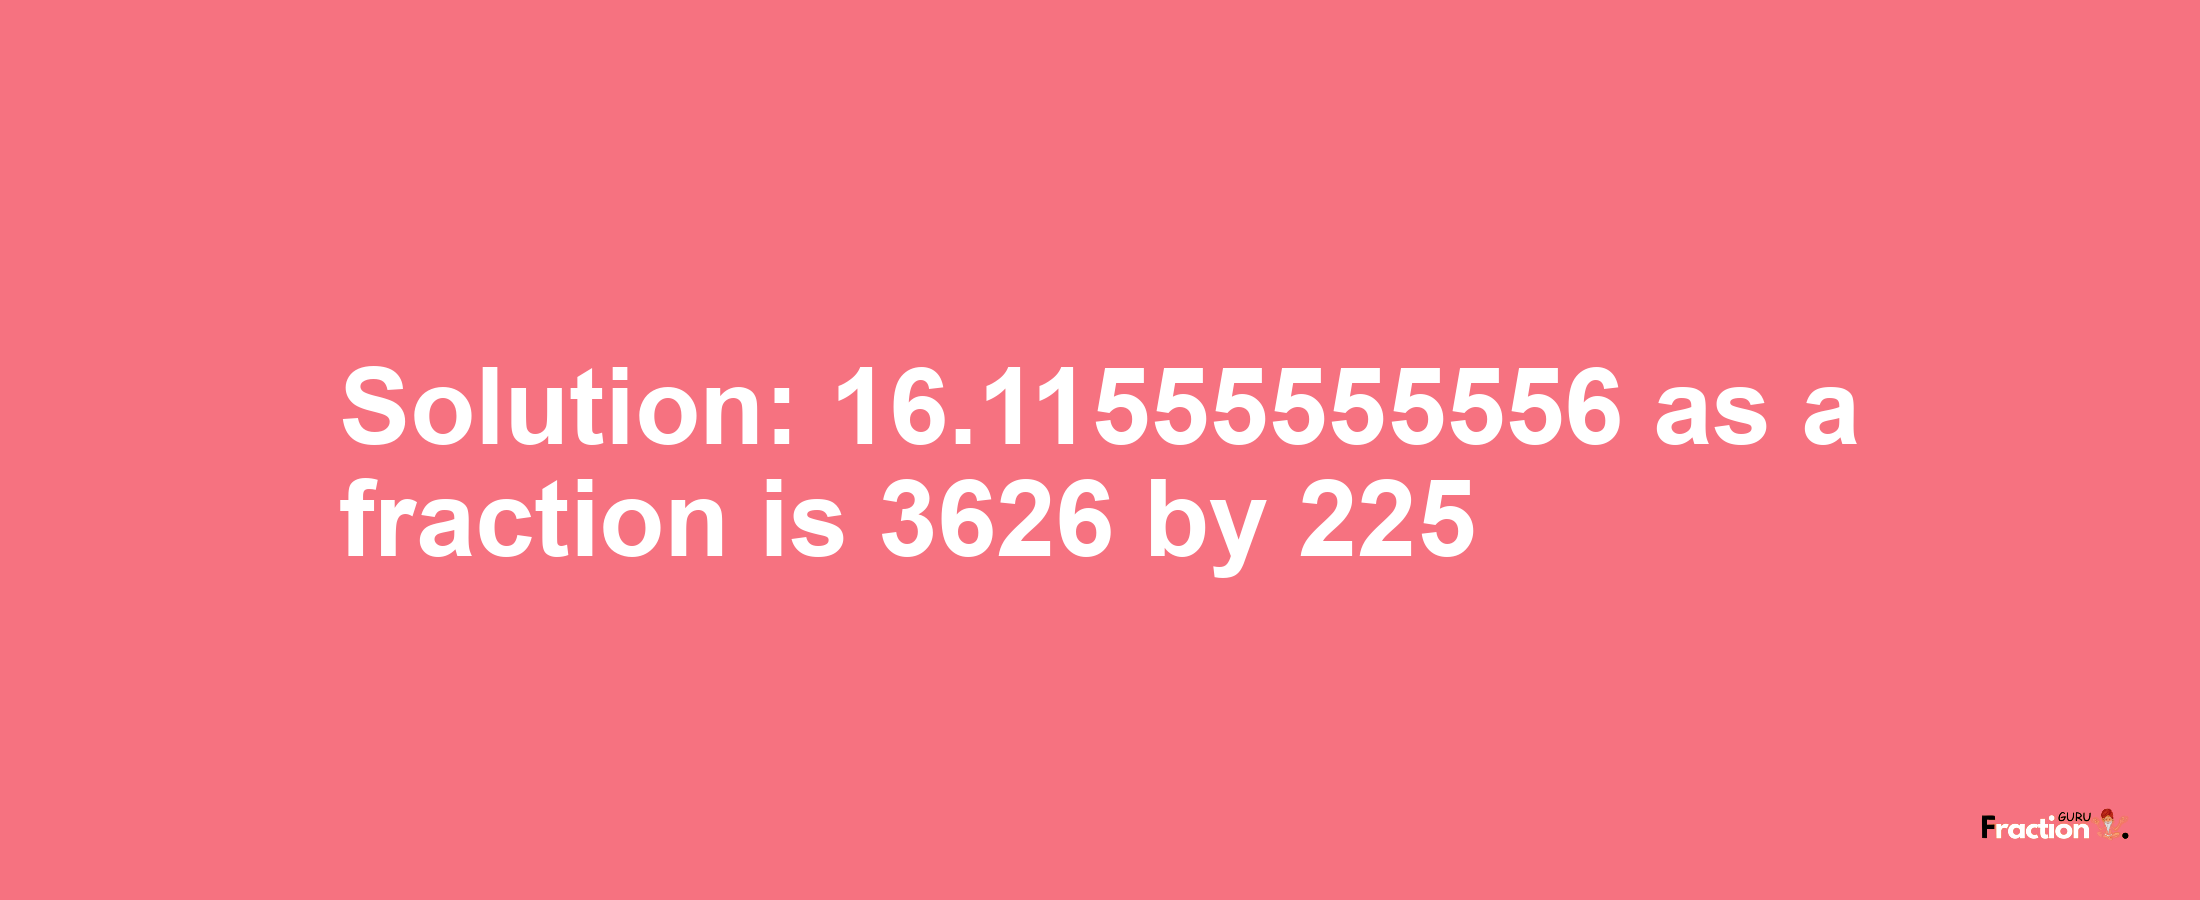 Solution:16.11555555556 as a fraction is 3626/225